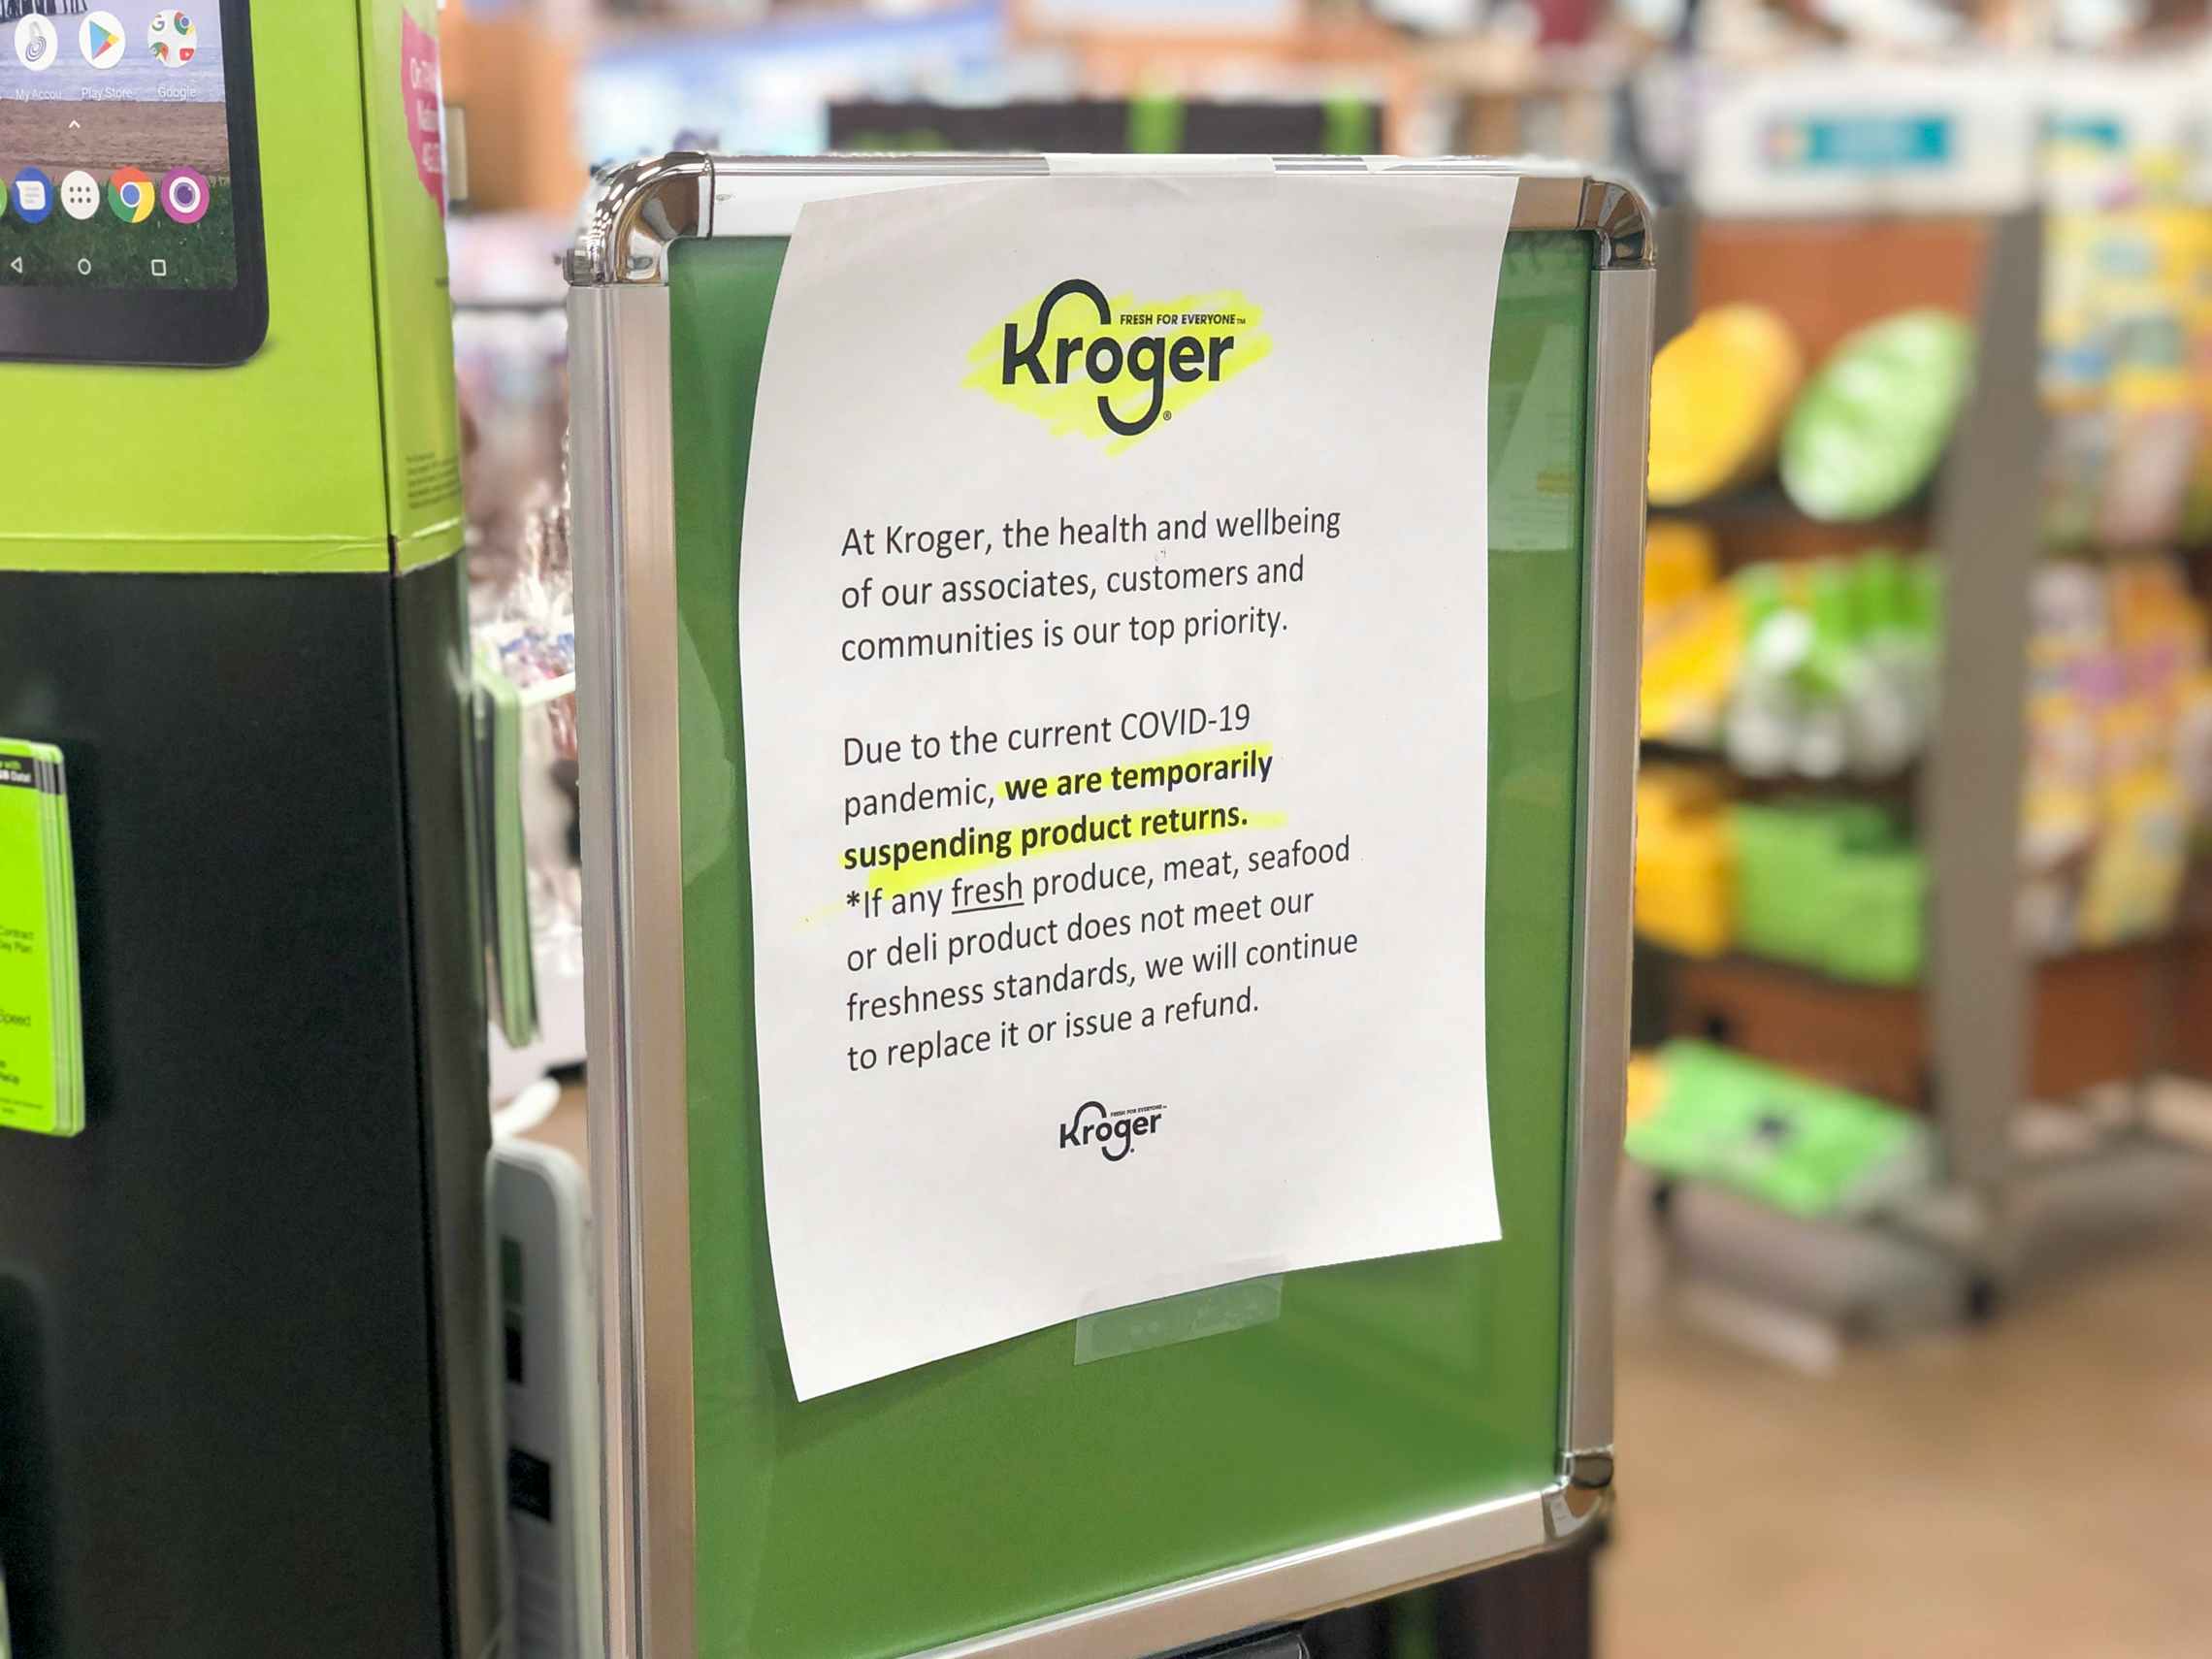 A sign inside a Kroger store, "due to the current Corvid-19 pandemic, we are temporarily suspending product returns.